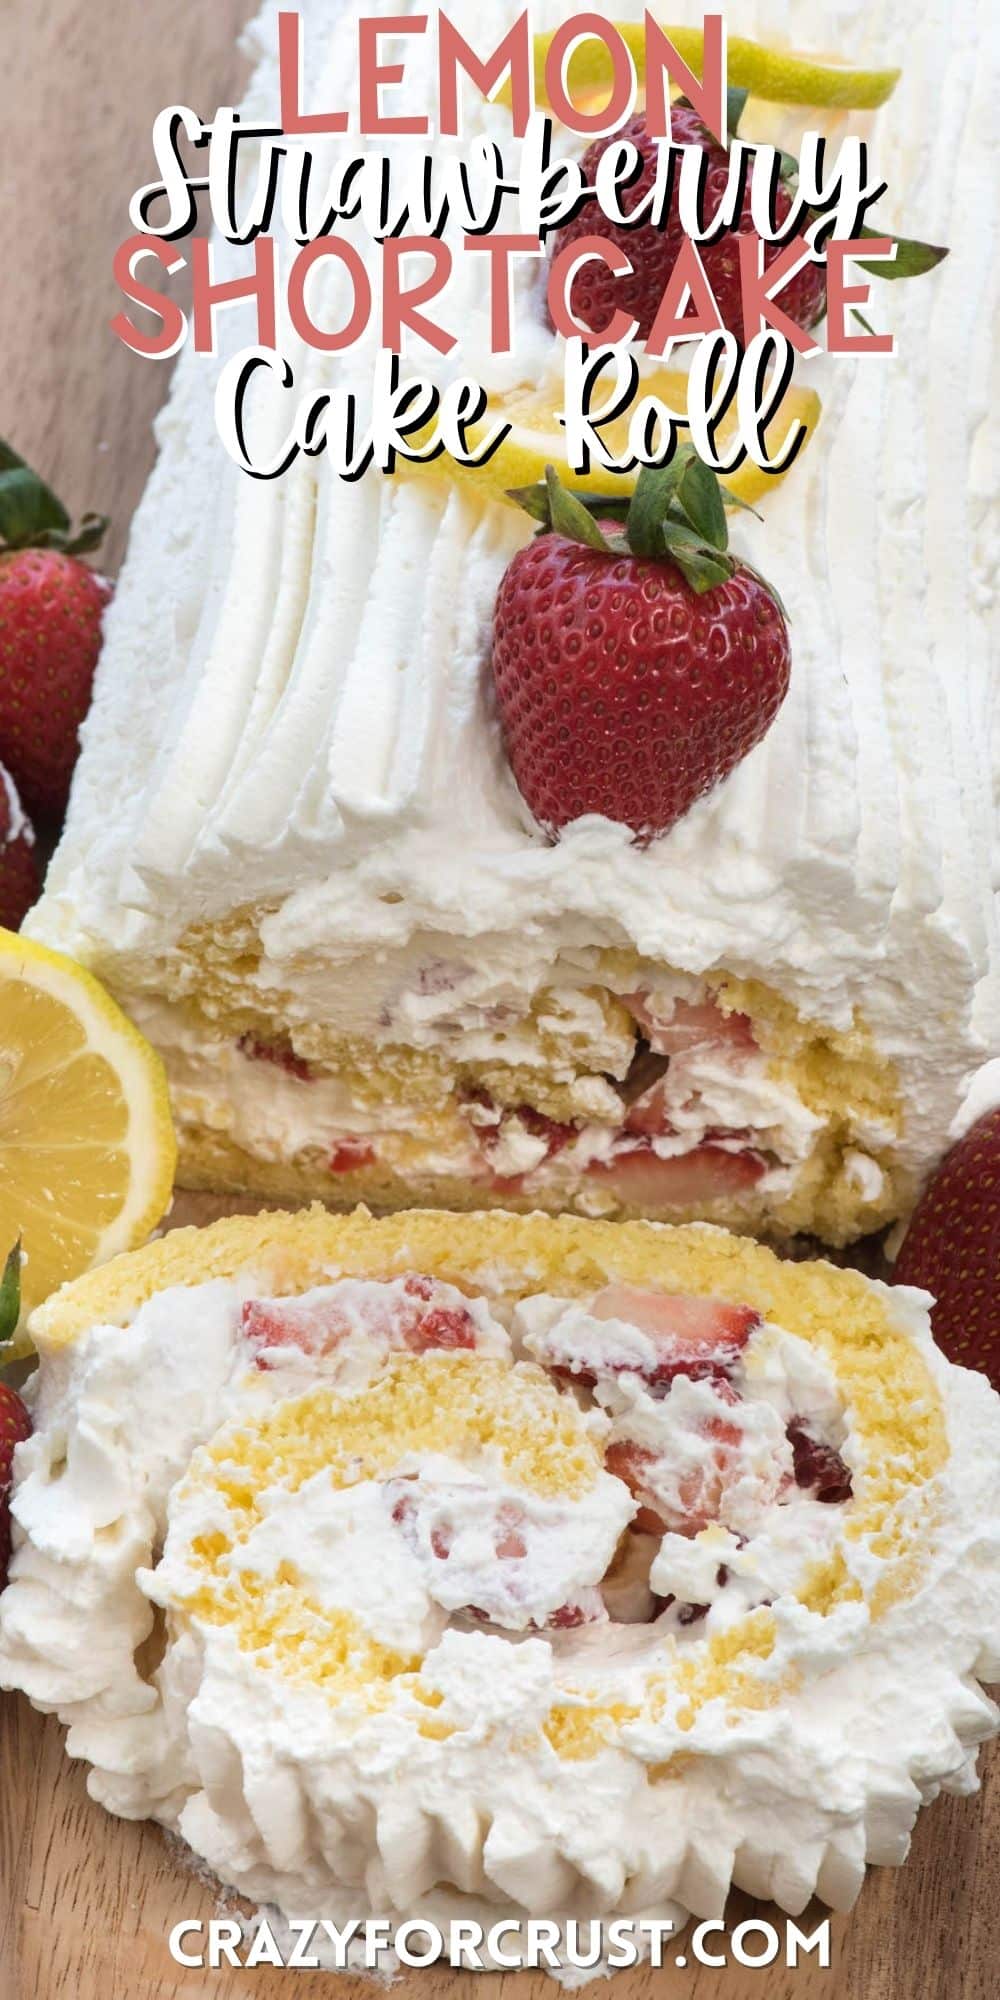 cake roll covered in white frosting with lemon slices and strawberries laid on top with words on the image.